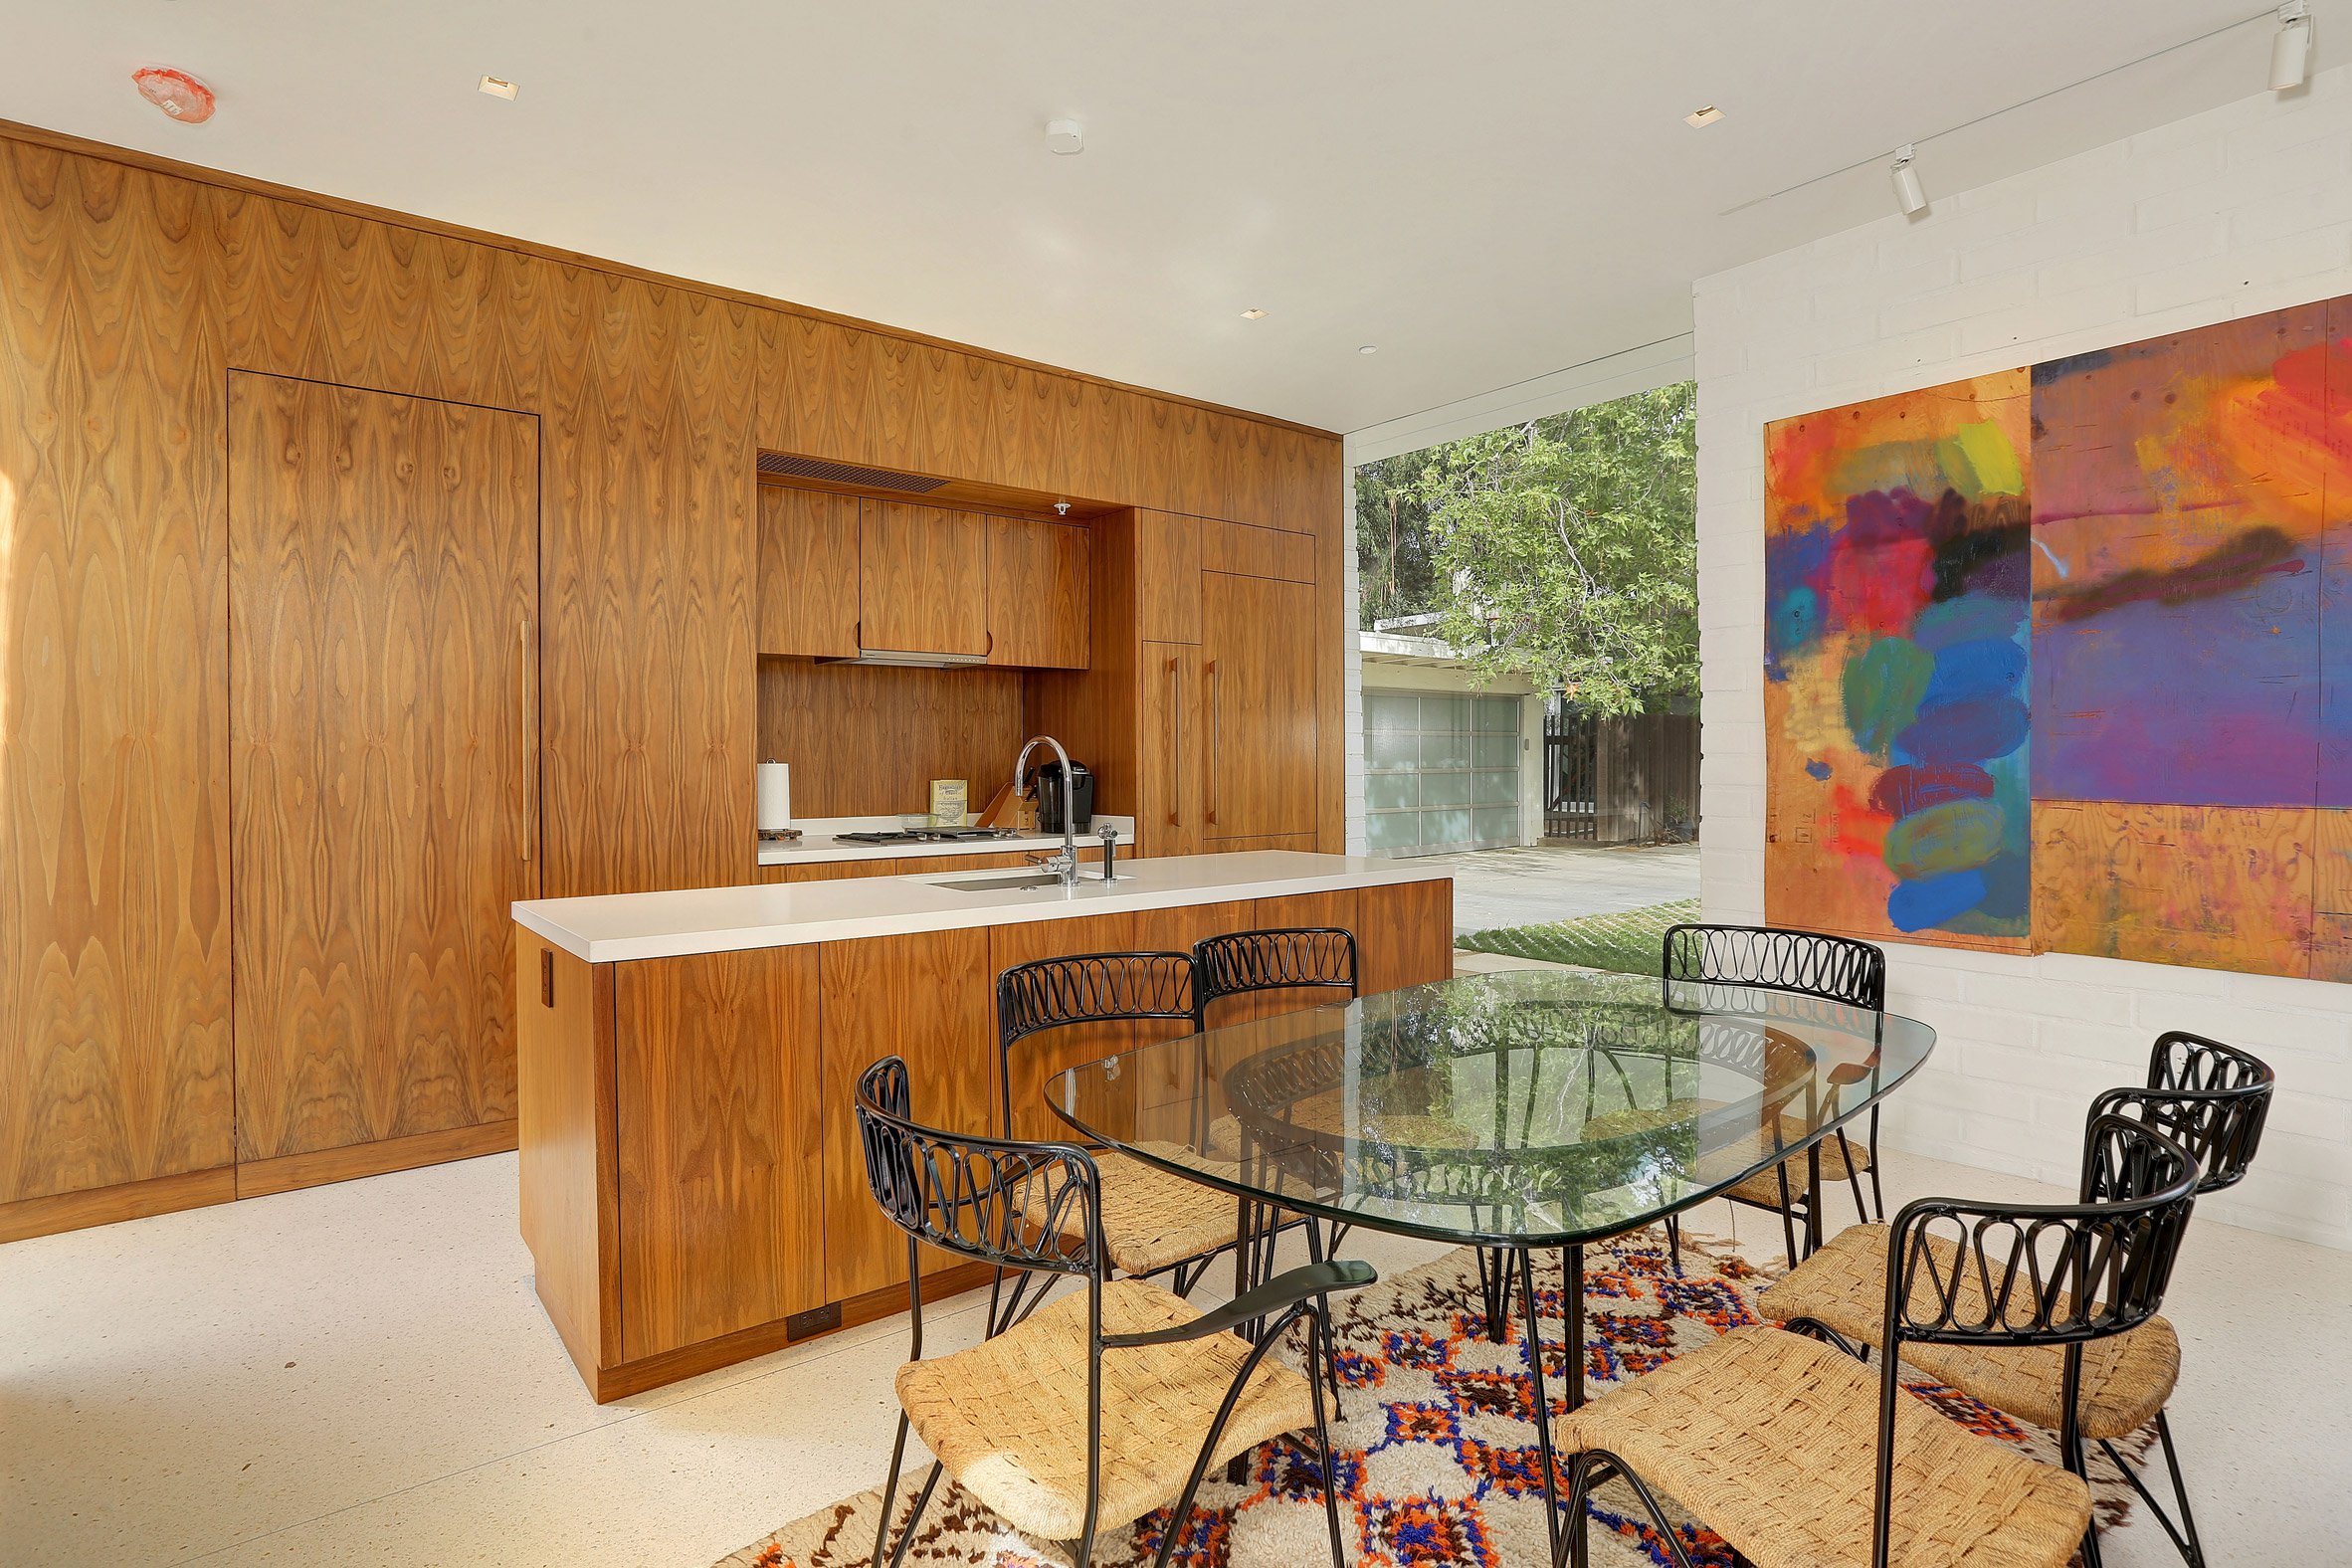 The interiors really show what mid century modern is, they are full of bold colors and wooden accents